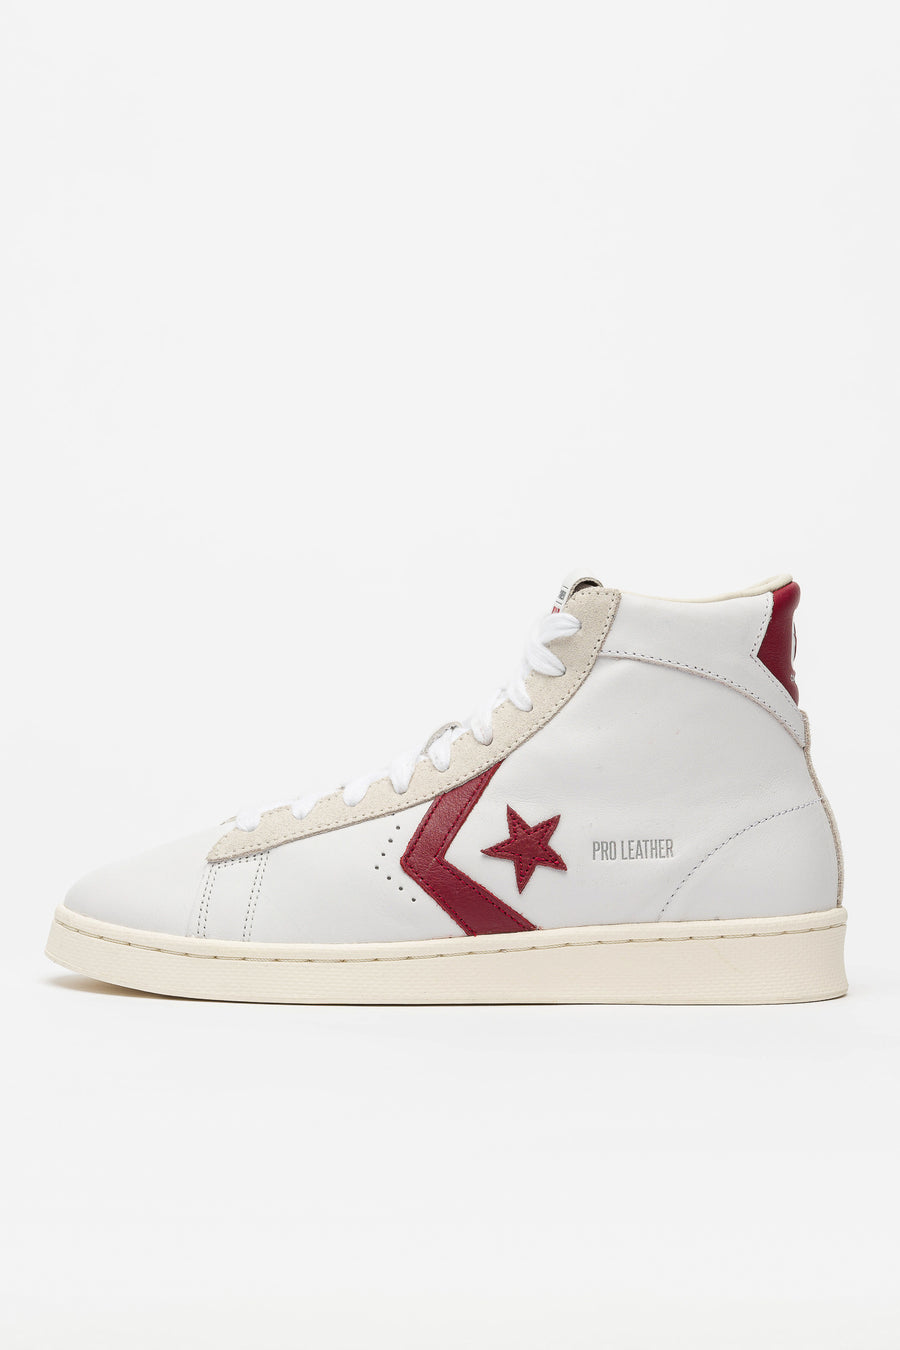 Pro Leather Hi in White/Team Red/Egret